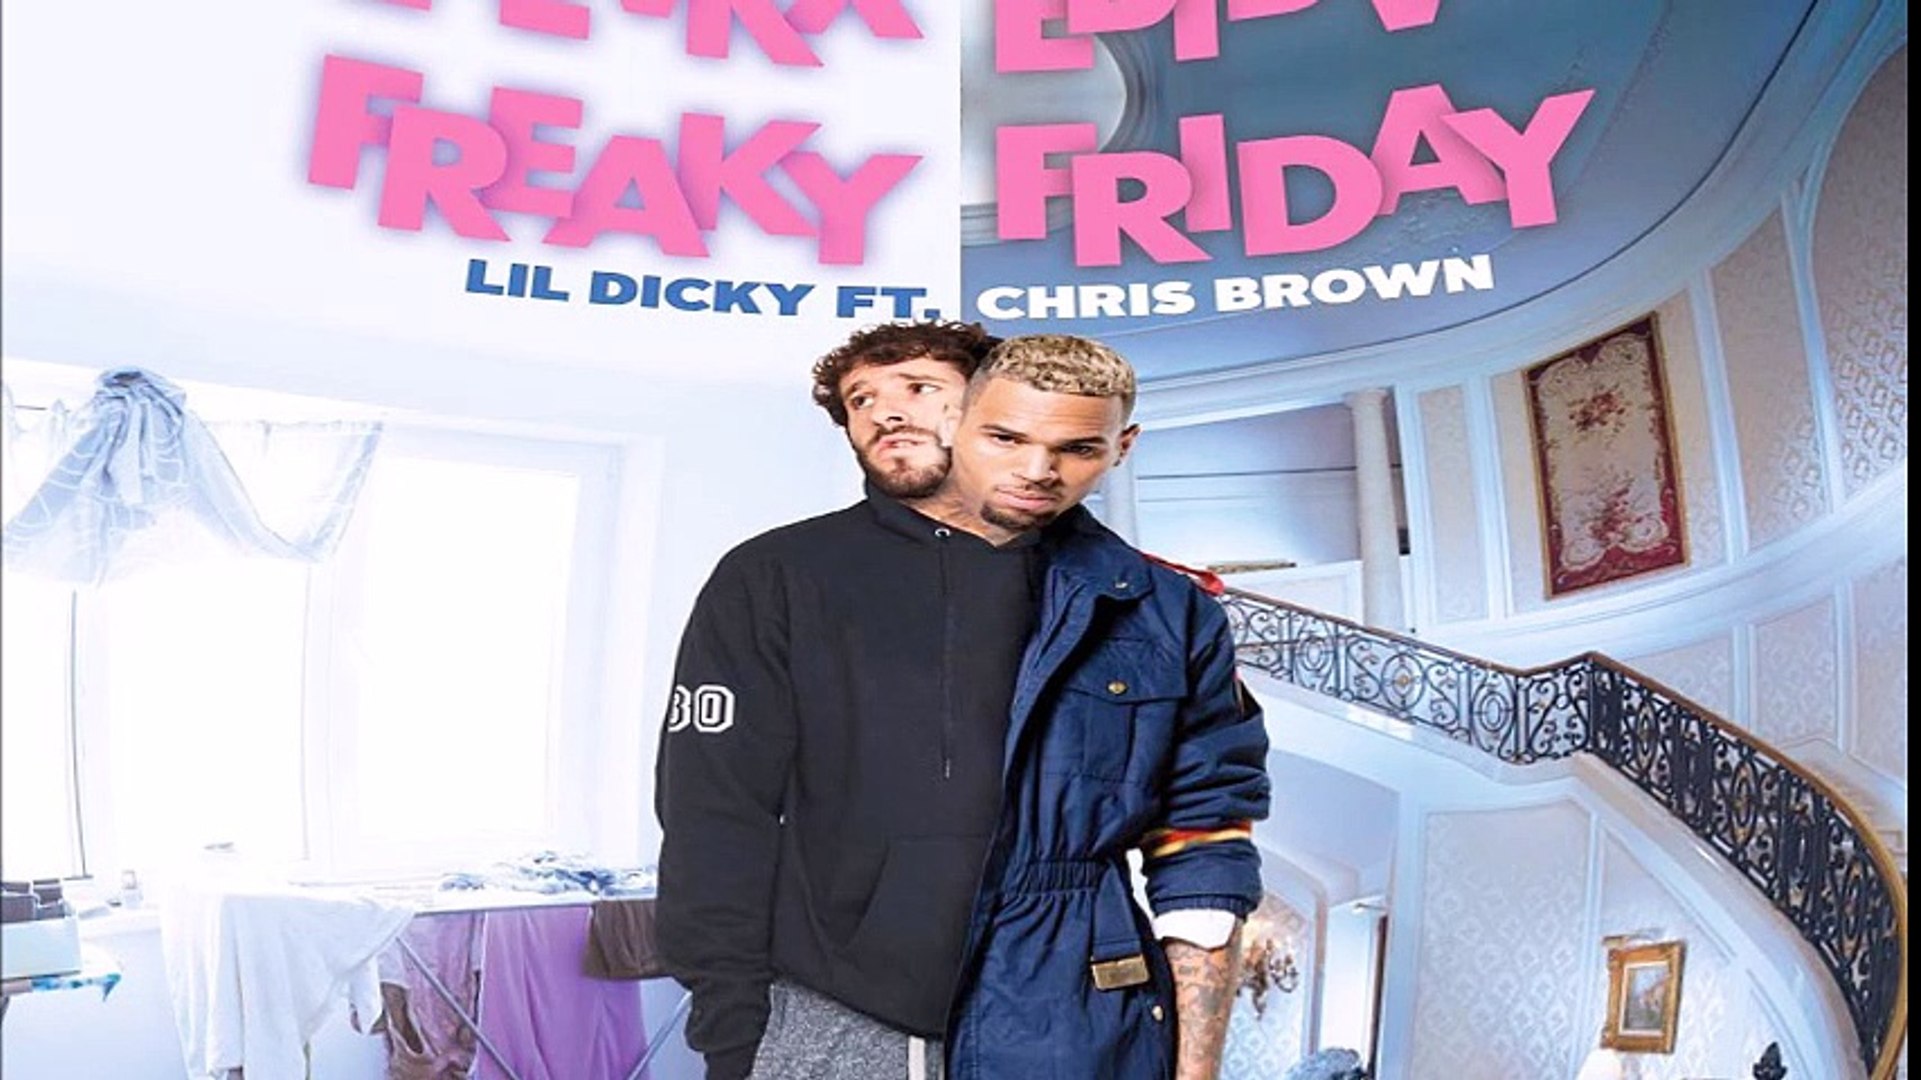 Lil Dicky Ft Chris Brown Freaky Friday Bastard Batucada 6adoida Remix Video Dailymotion Freaky friday is a song that involves a crossover between lil dicky and chris brown. lil dicky ft chris brown freaky friday bastard batucada 6adoida remix